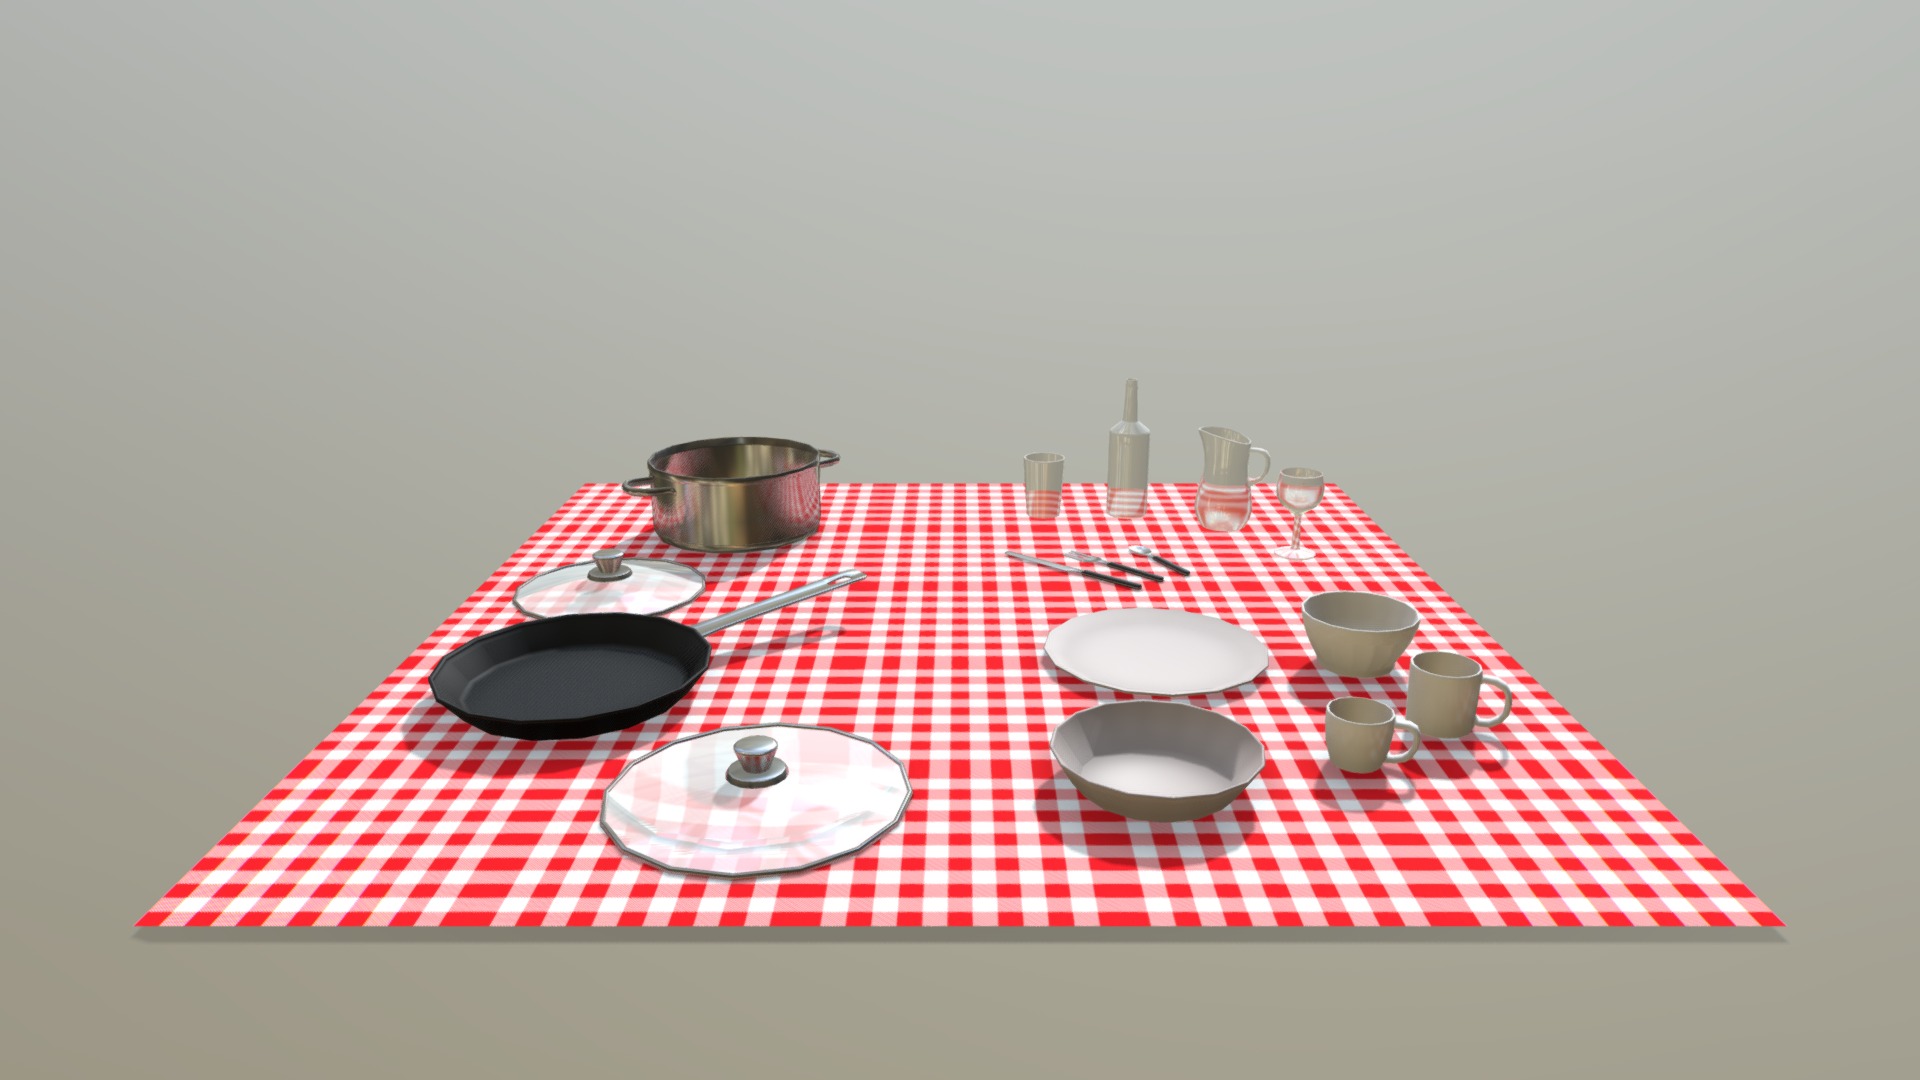 3D model Kitchen – set - This is a 3D model of the Kitchen - set. The 3D model is about a table with plates and glasses on it.